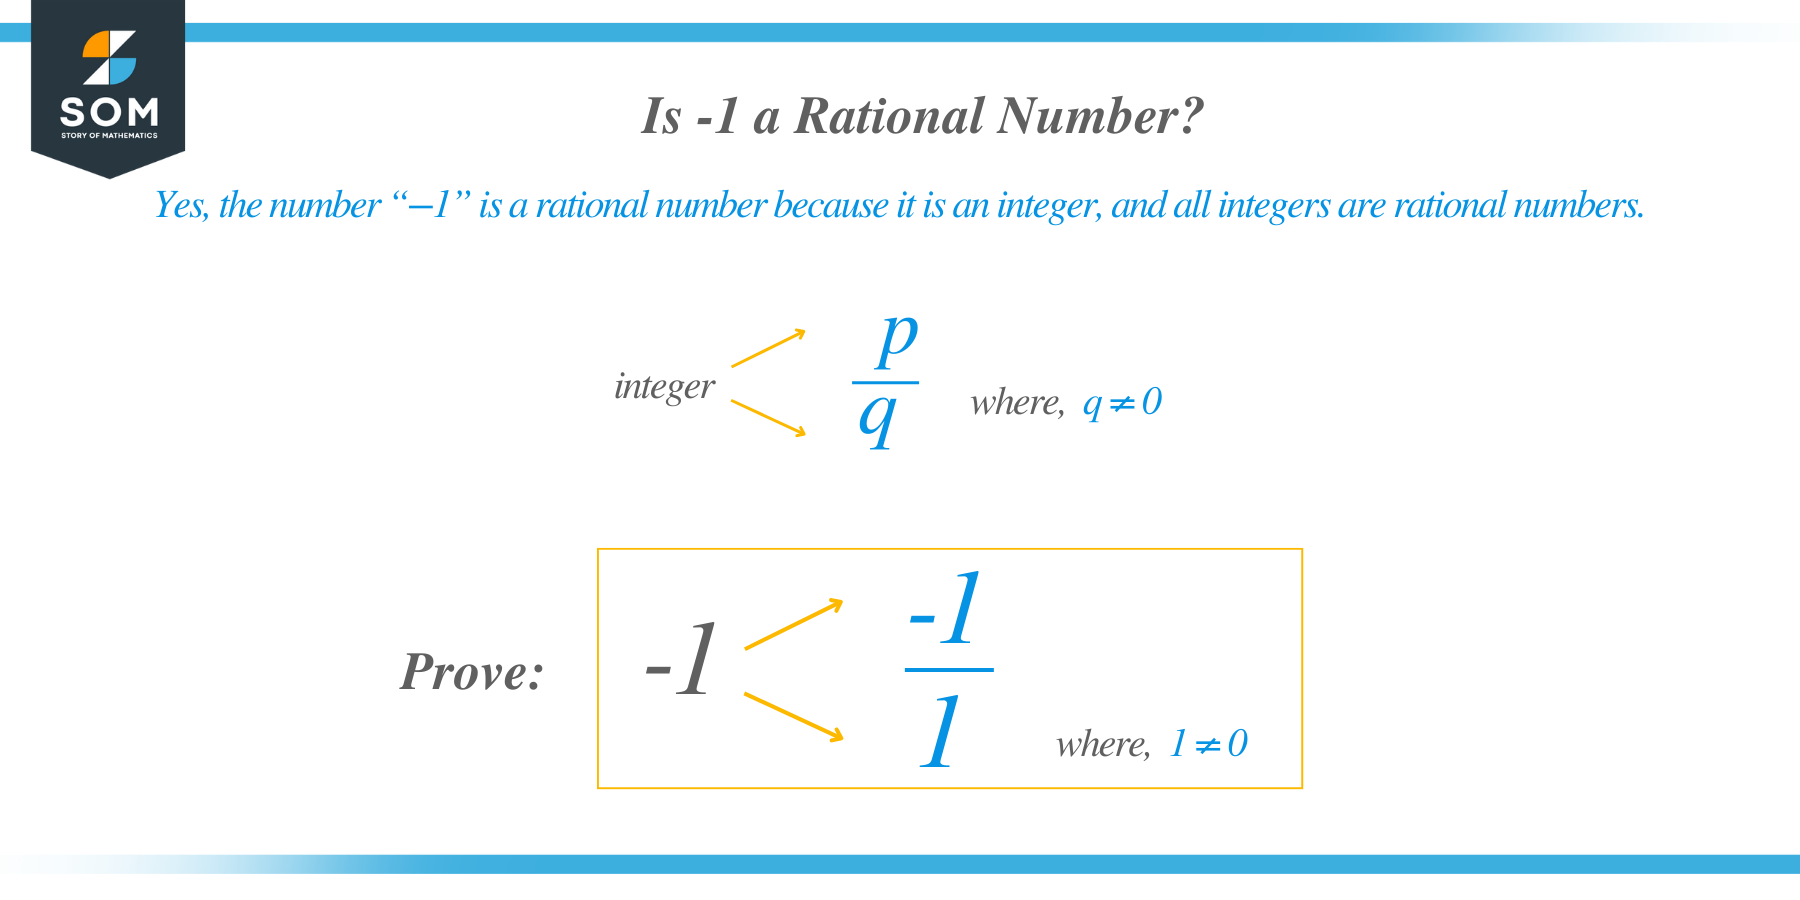 Is -1 a Rational Number?